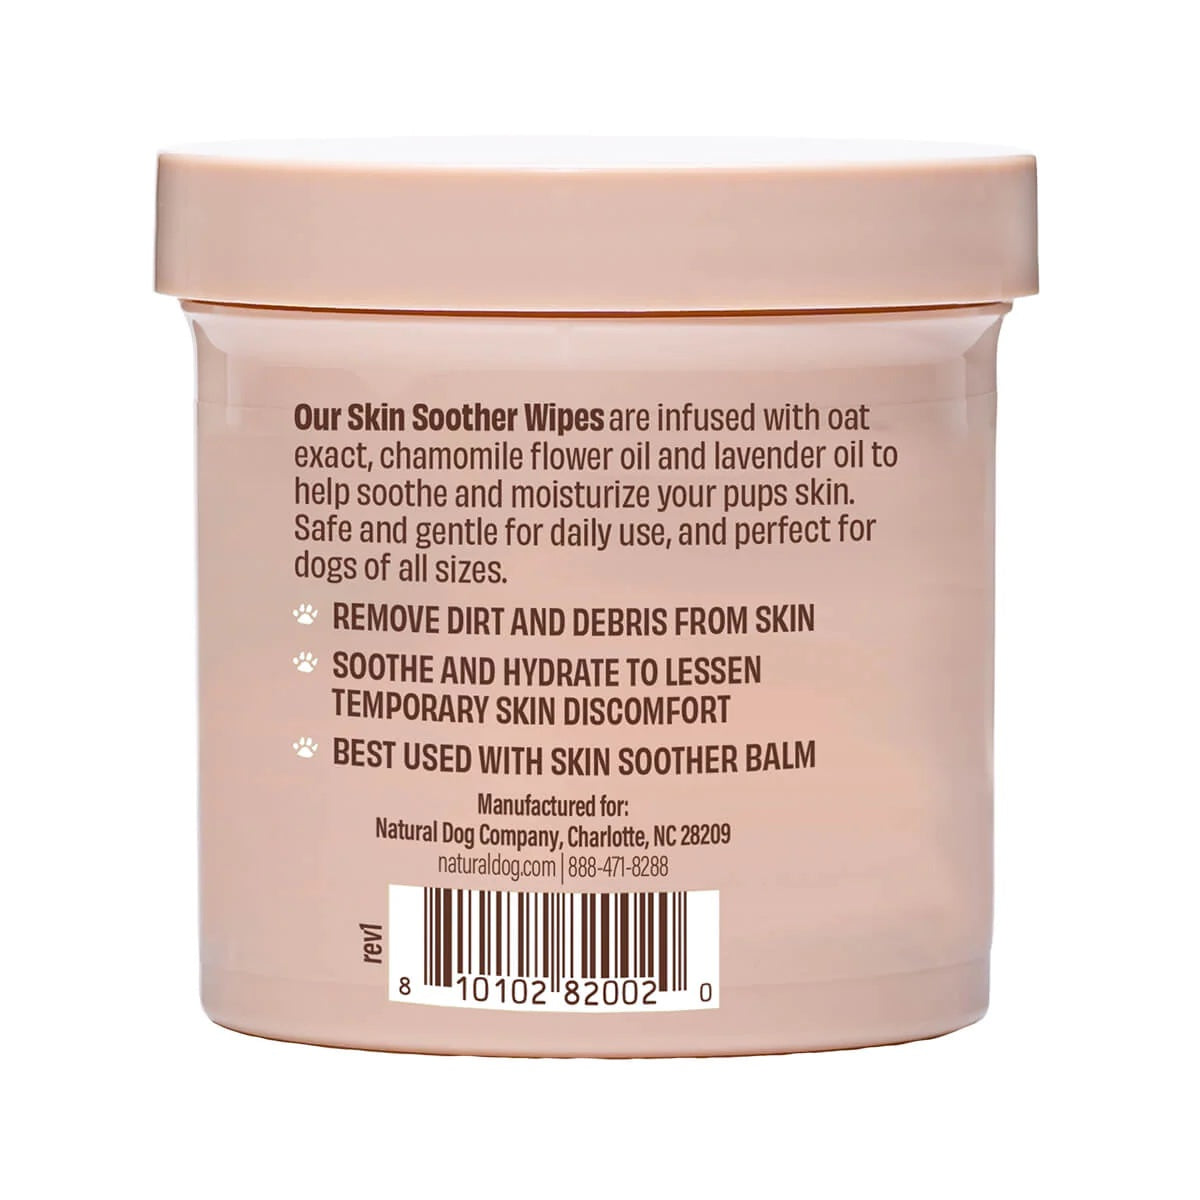 Natural Dog Company Skin Soother Wipes (50 sheets)